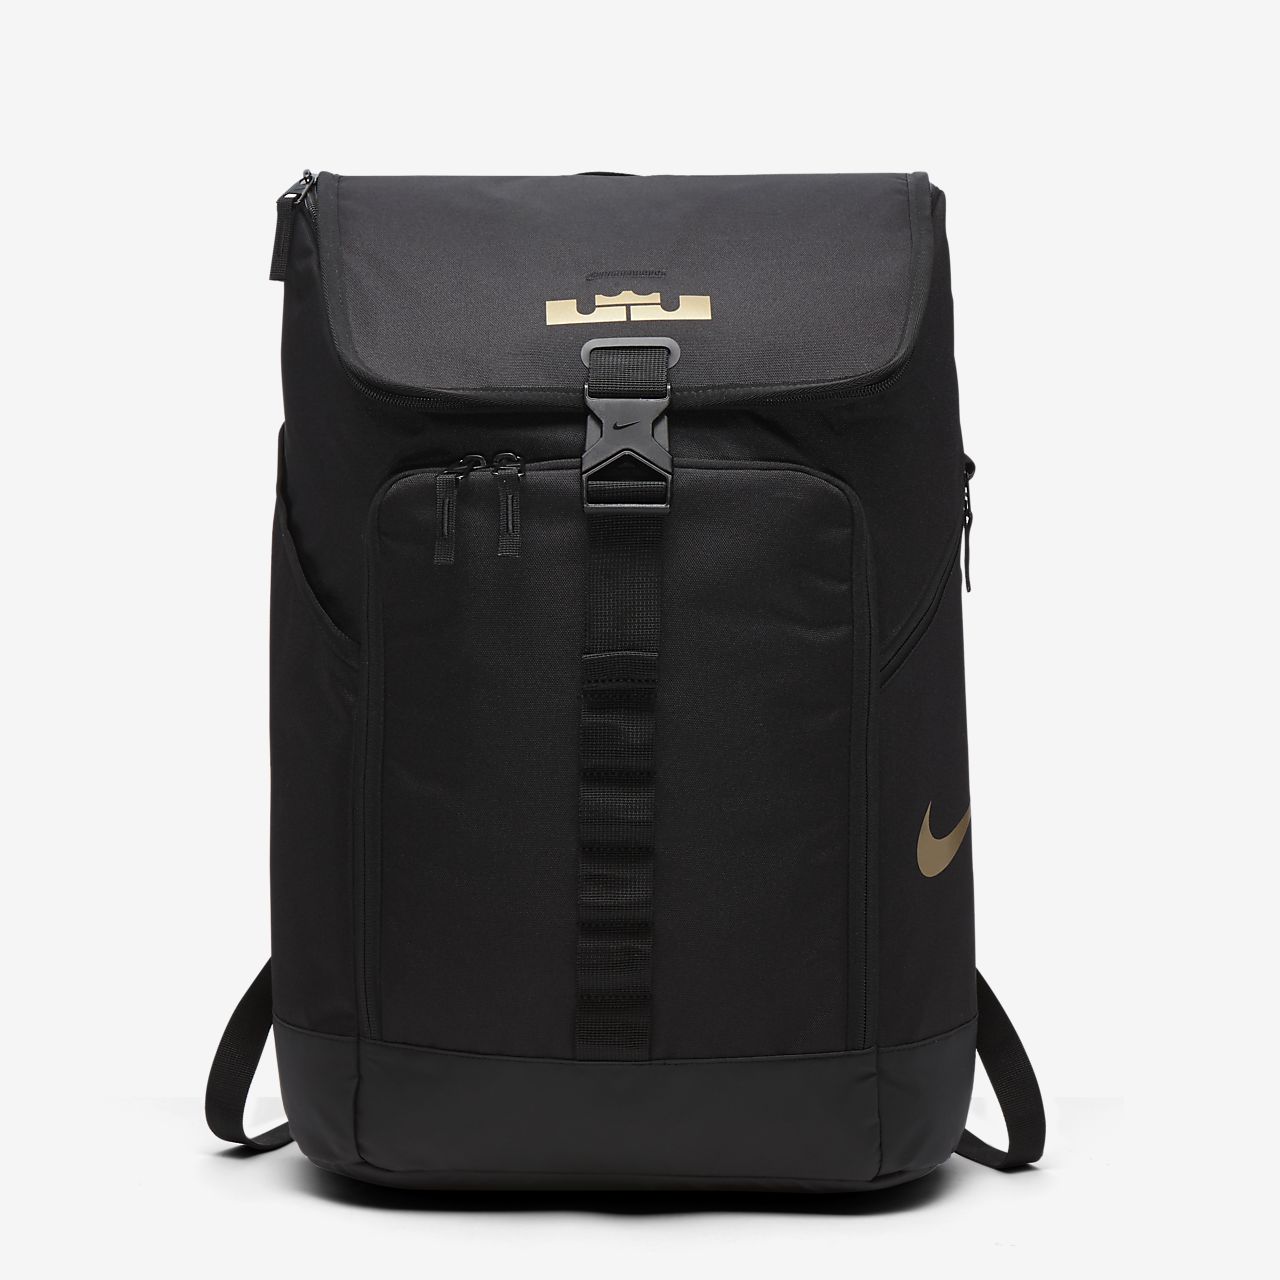 lebron backpack review